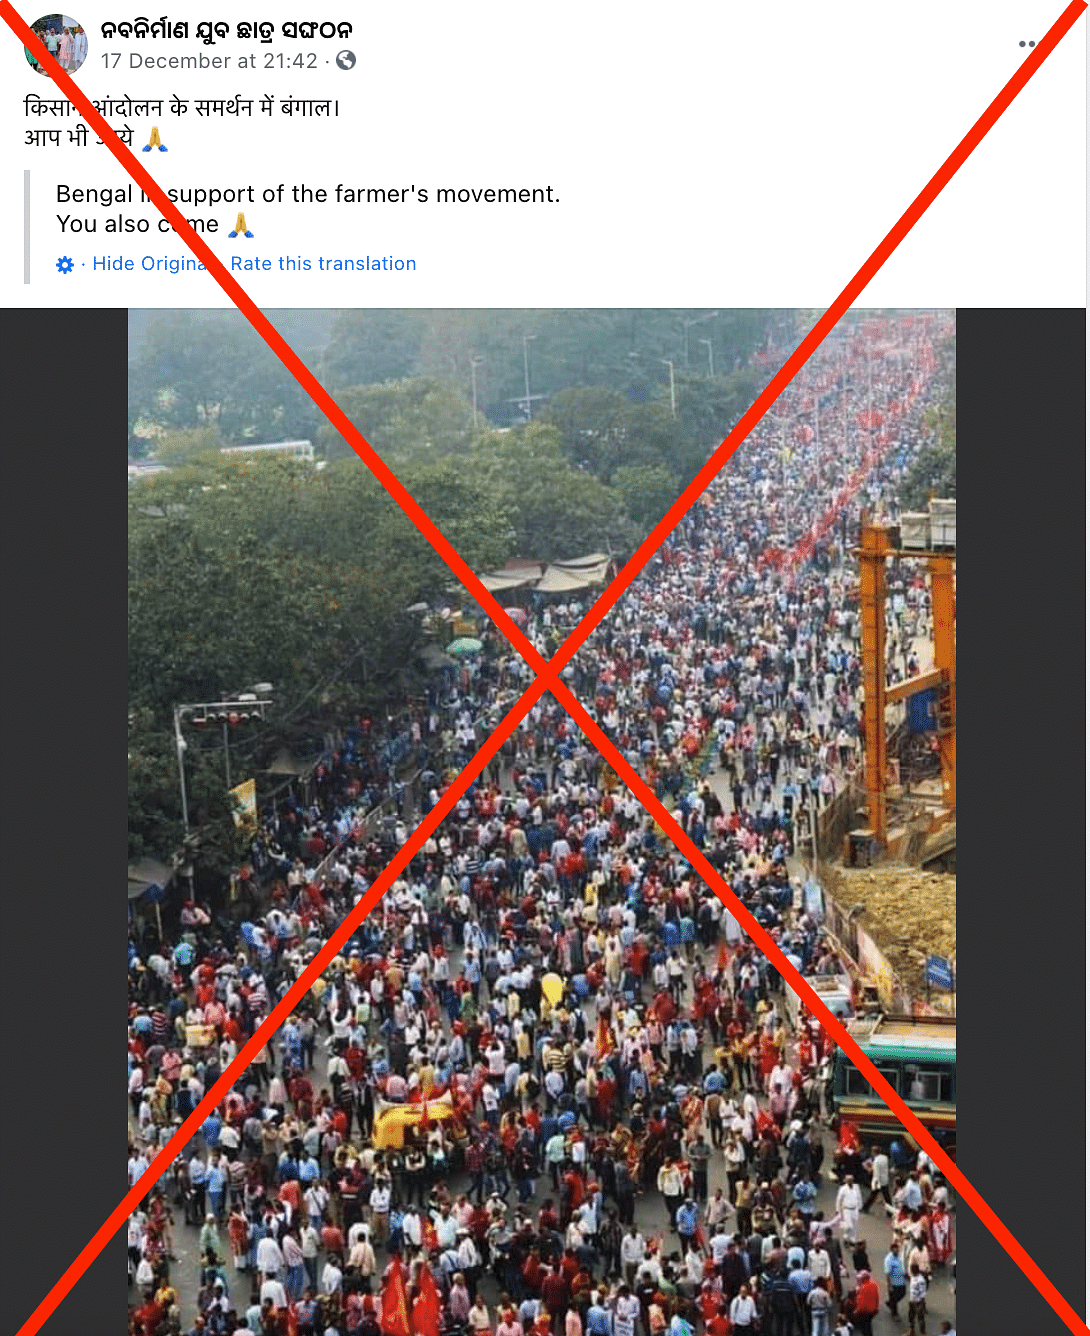 The image is from West Bengal in 2019 when a march was held against the privatisation of PSUs. 